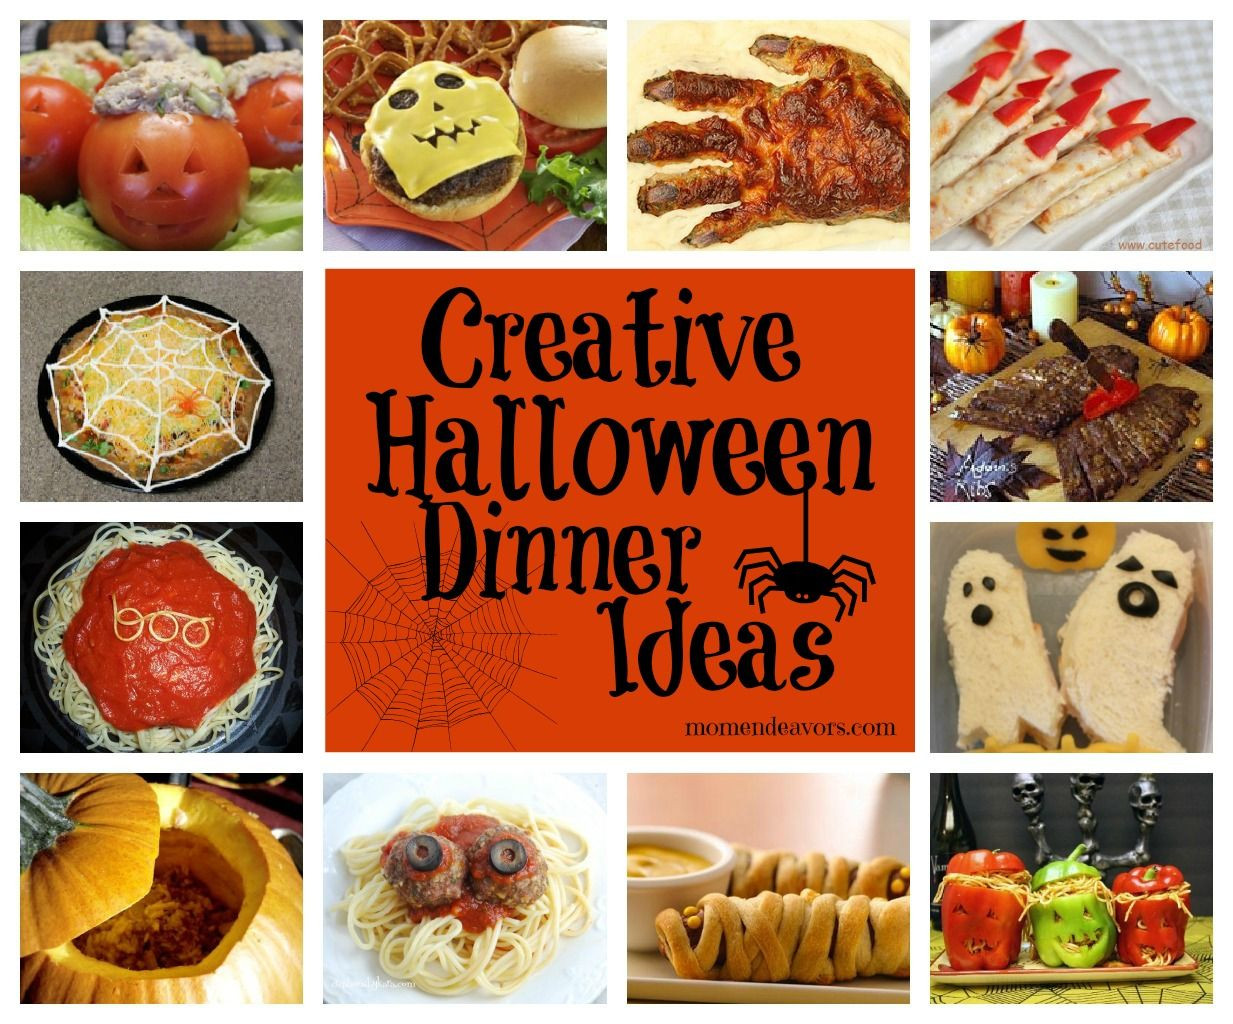 Halloween Side Dishes For Parties
 Links to lots of creative Halloween dinner ideas & side